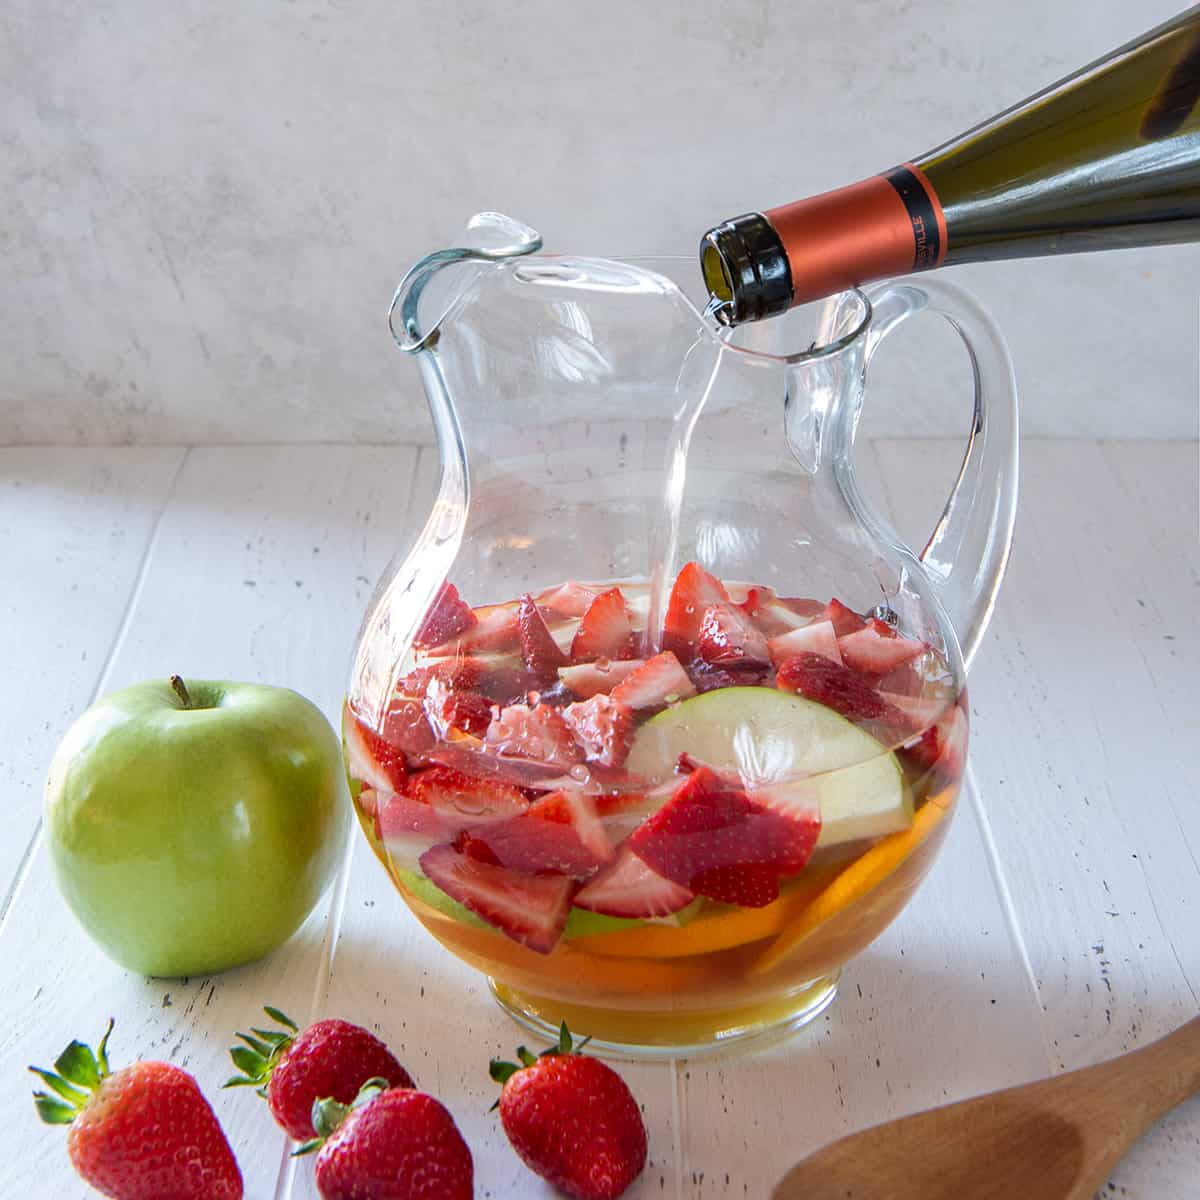 Closeup of pouring a bottle of wine into a pitcher with fruit to make white wine sangria.